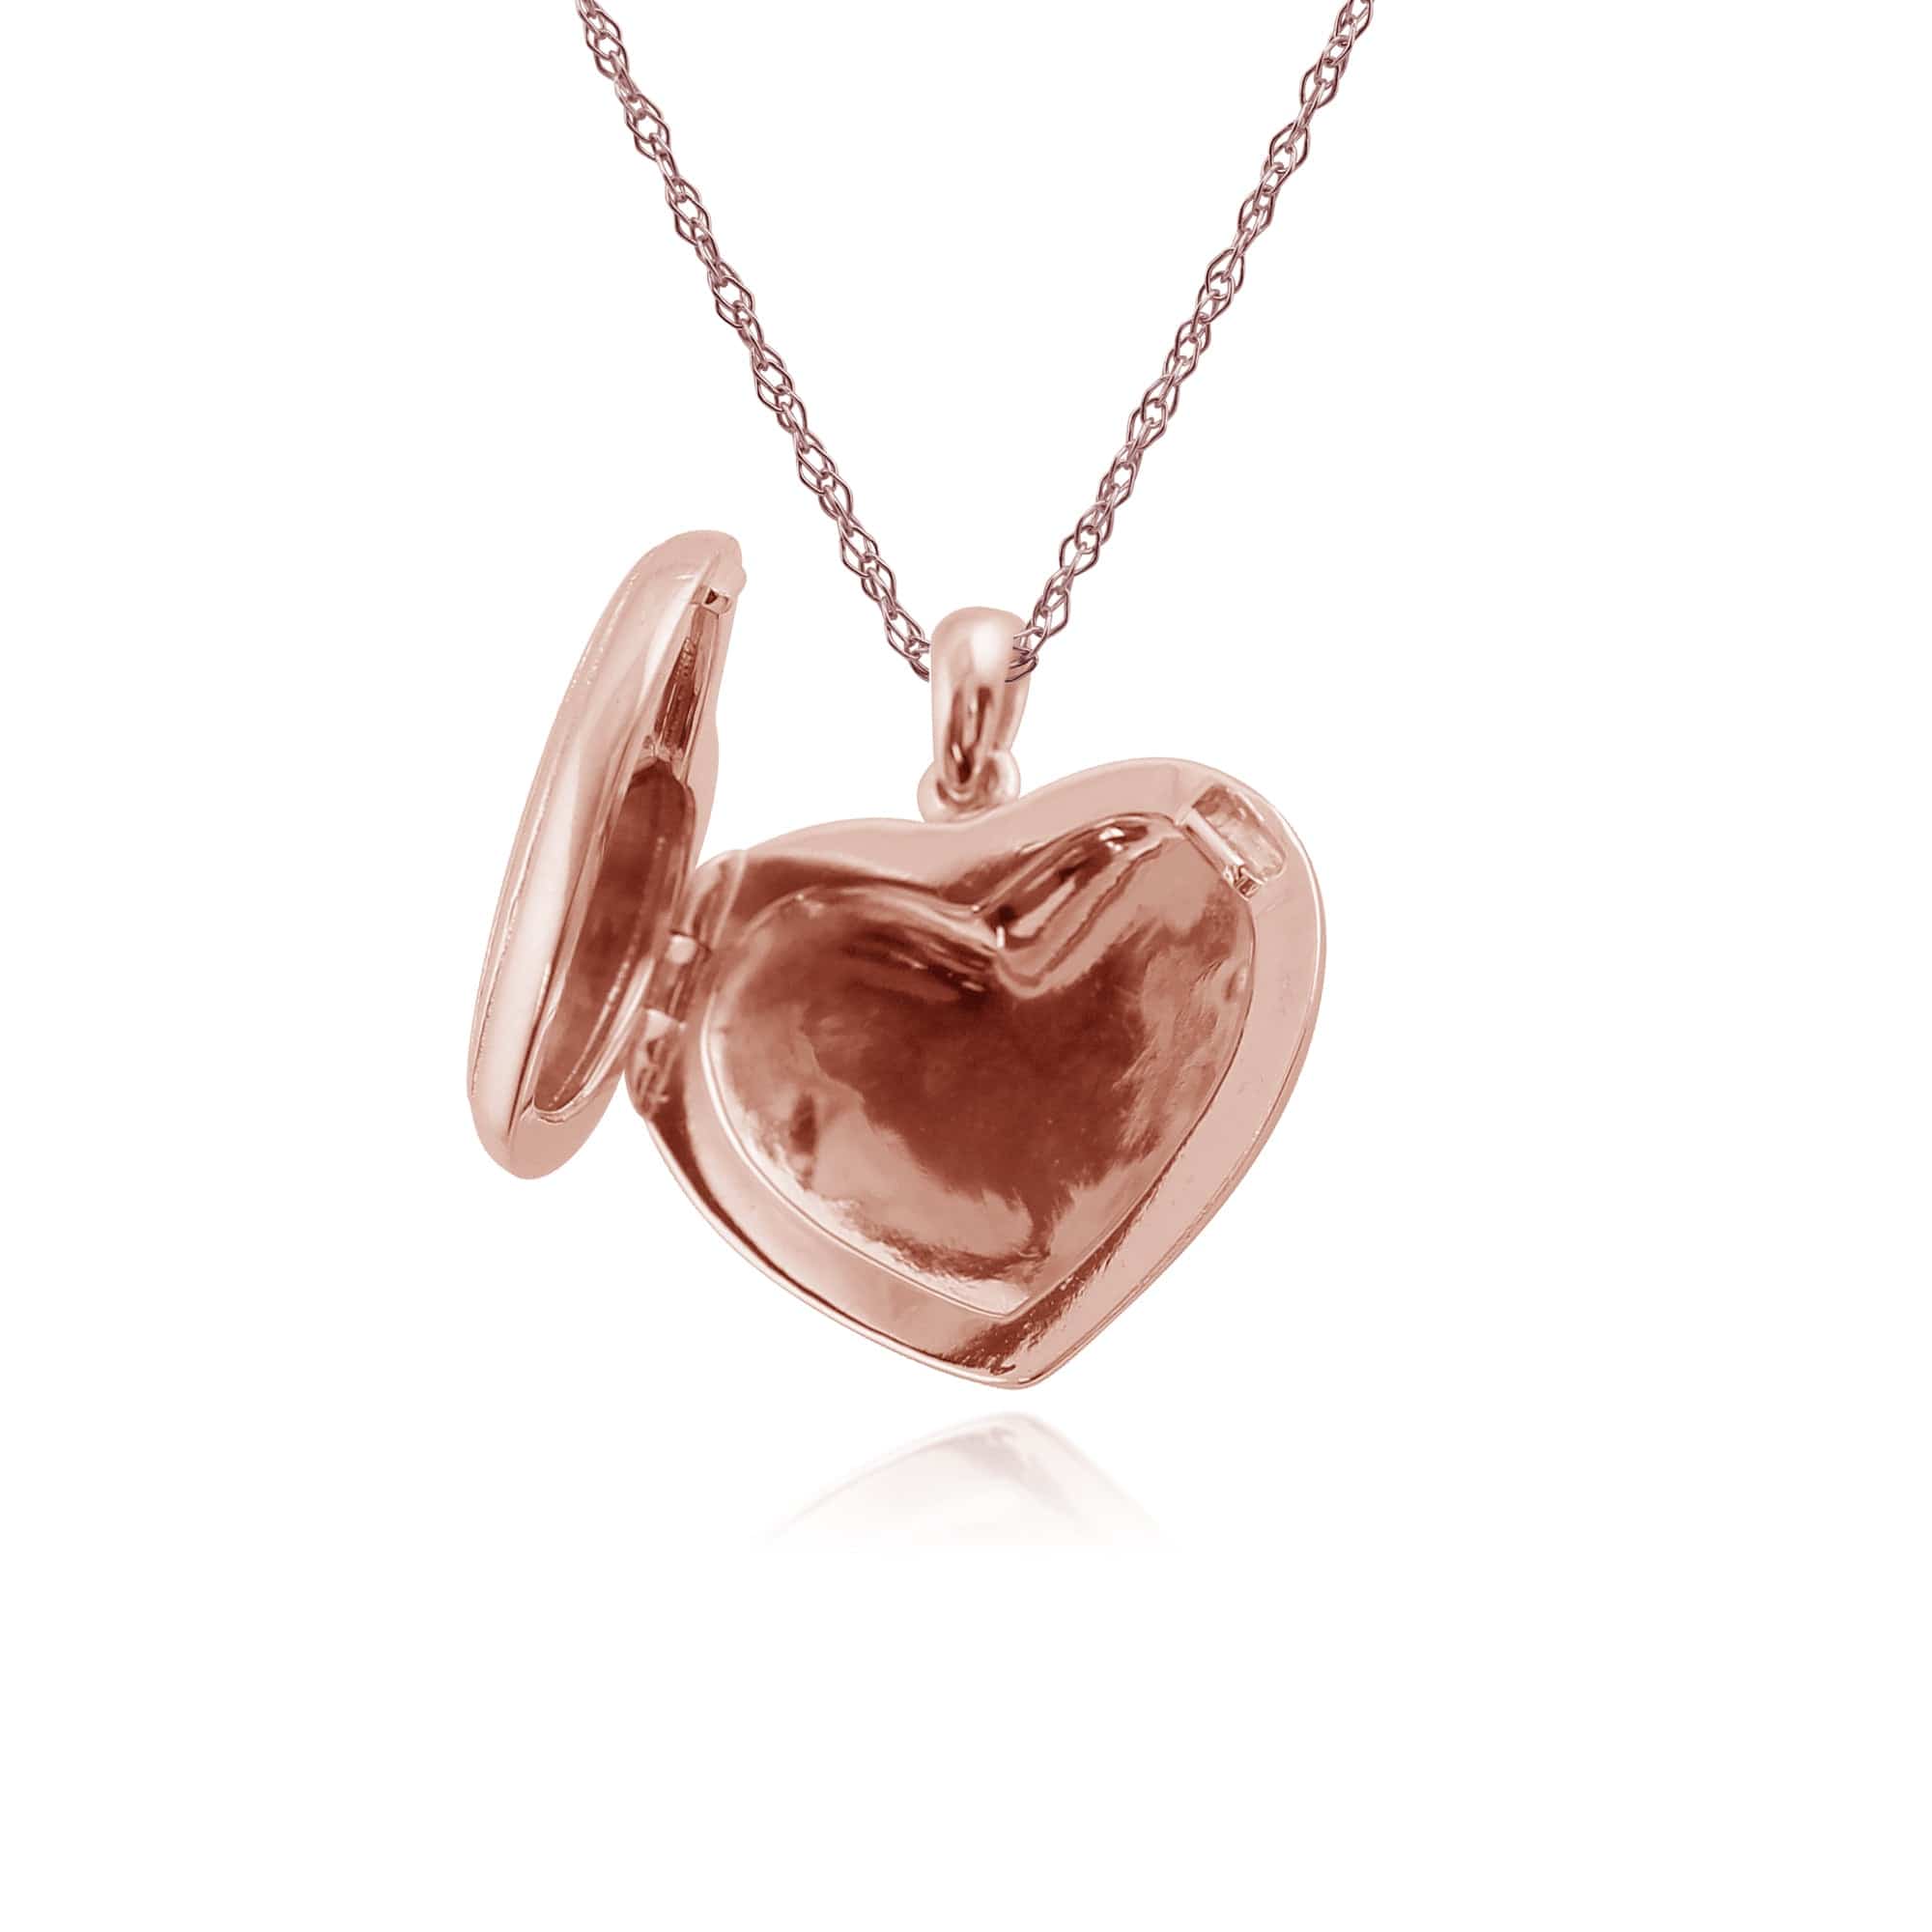 Classic Round Diamond Heart Shaped Locket in Rose Gold Plated Sterling Silver - Gemondo